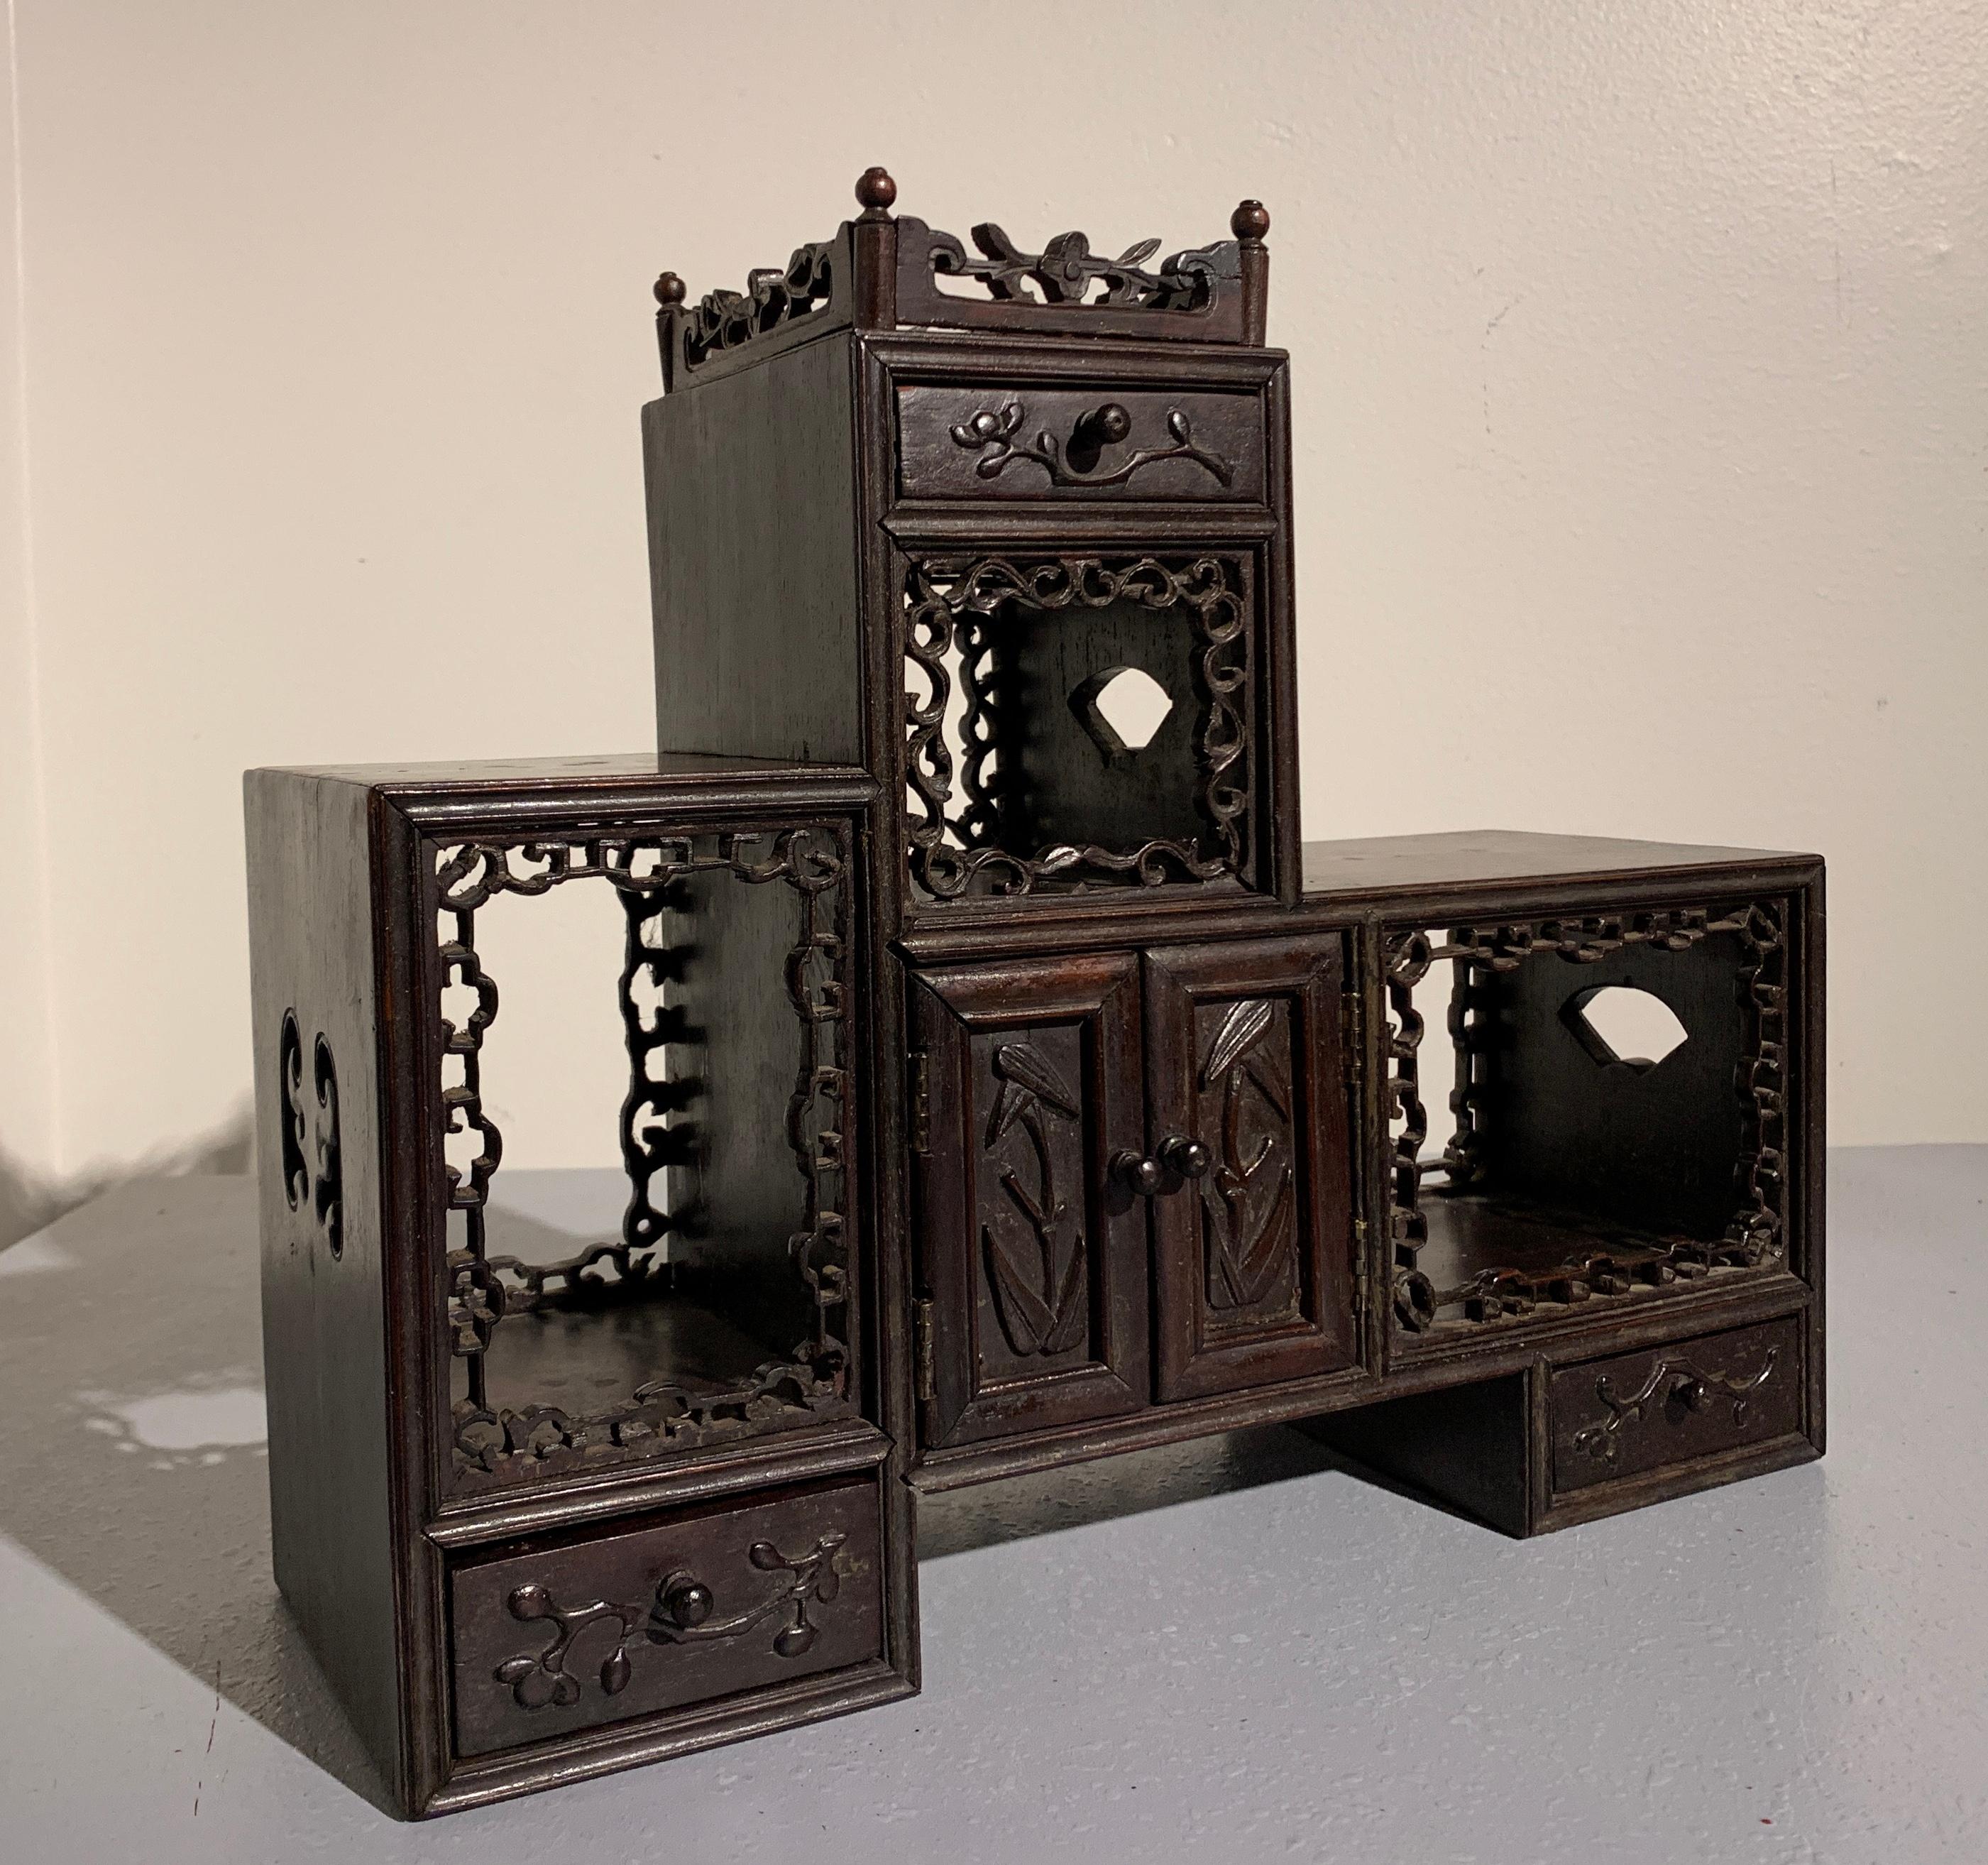 A charming Chinese miniature hardwood doubaoge, Qing Dynasty, late 19th century. 

The duobaoge is a multi-tiered display cabinet used to hold objects of art and curios, often to highlight discreet collections. An element of both the scholar